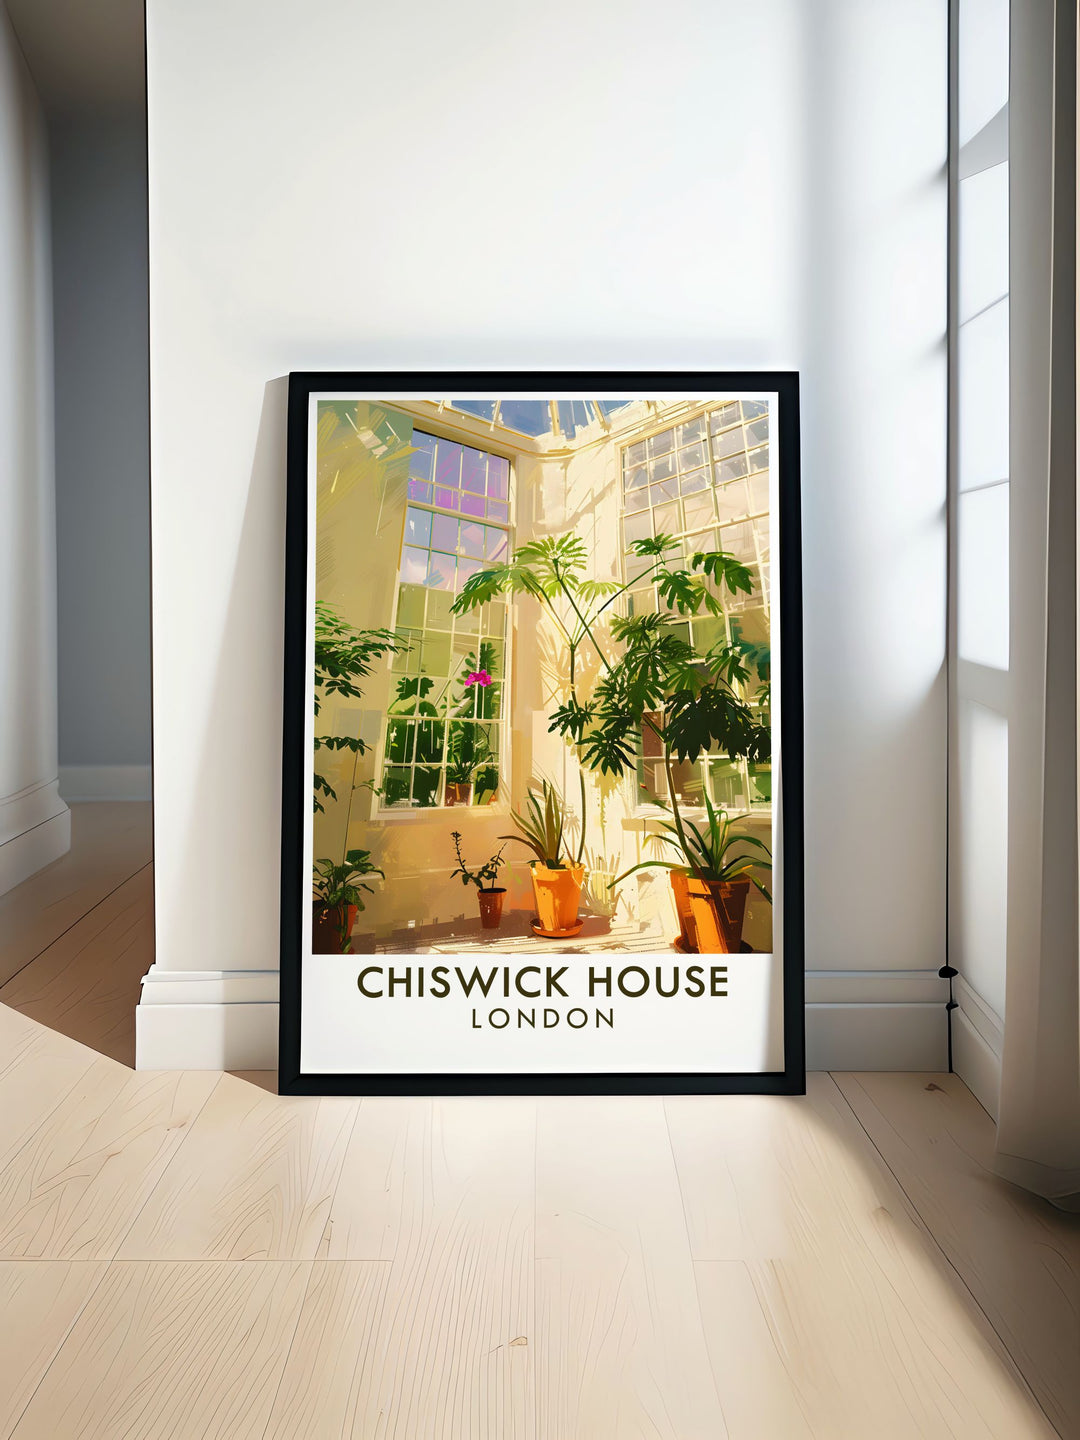 Capture the grandeur of Chiswick House, an architectural masterpiece inspired by Andrea Palladio, and bring a touch of neoclassical elegance into your home.